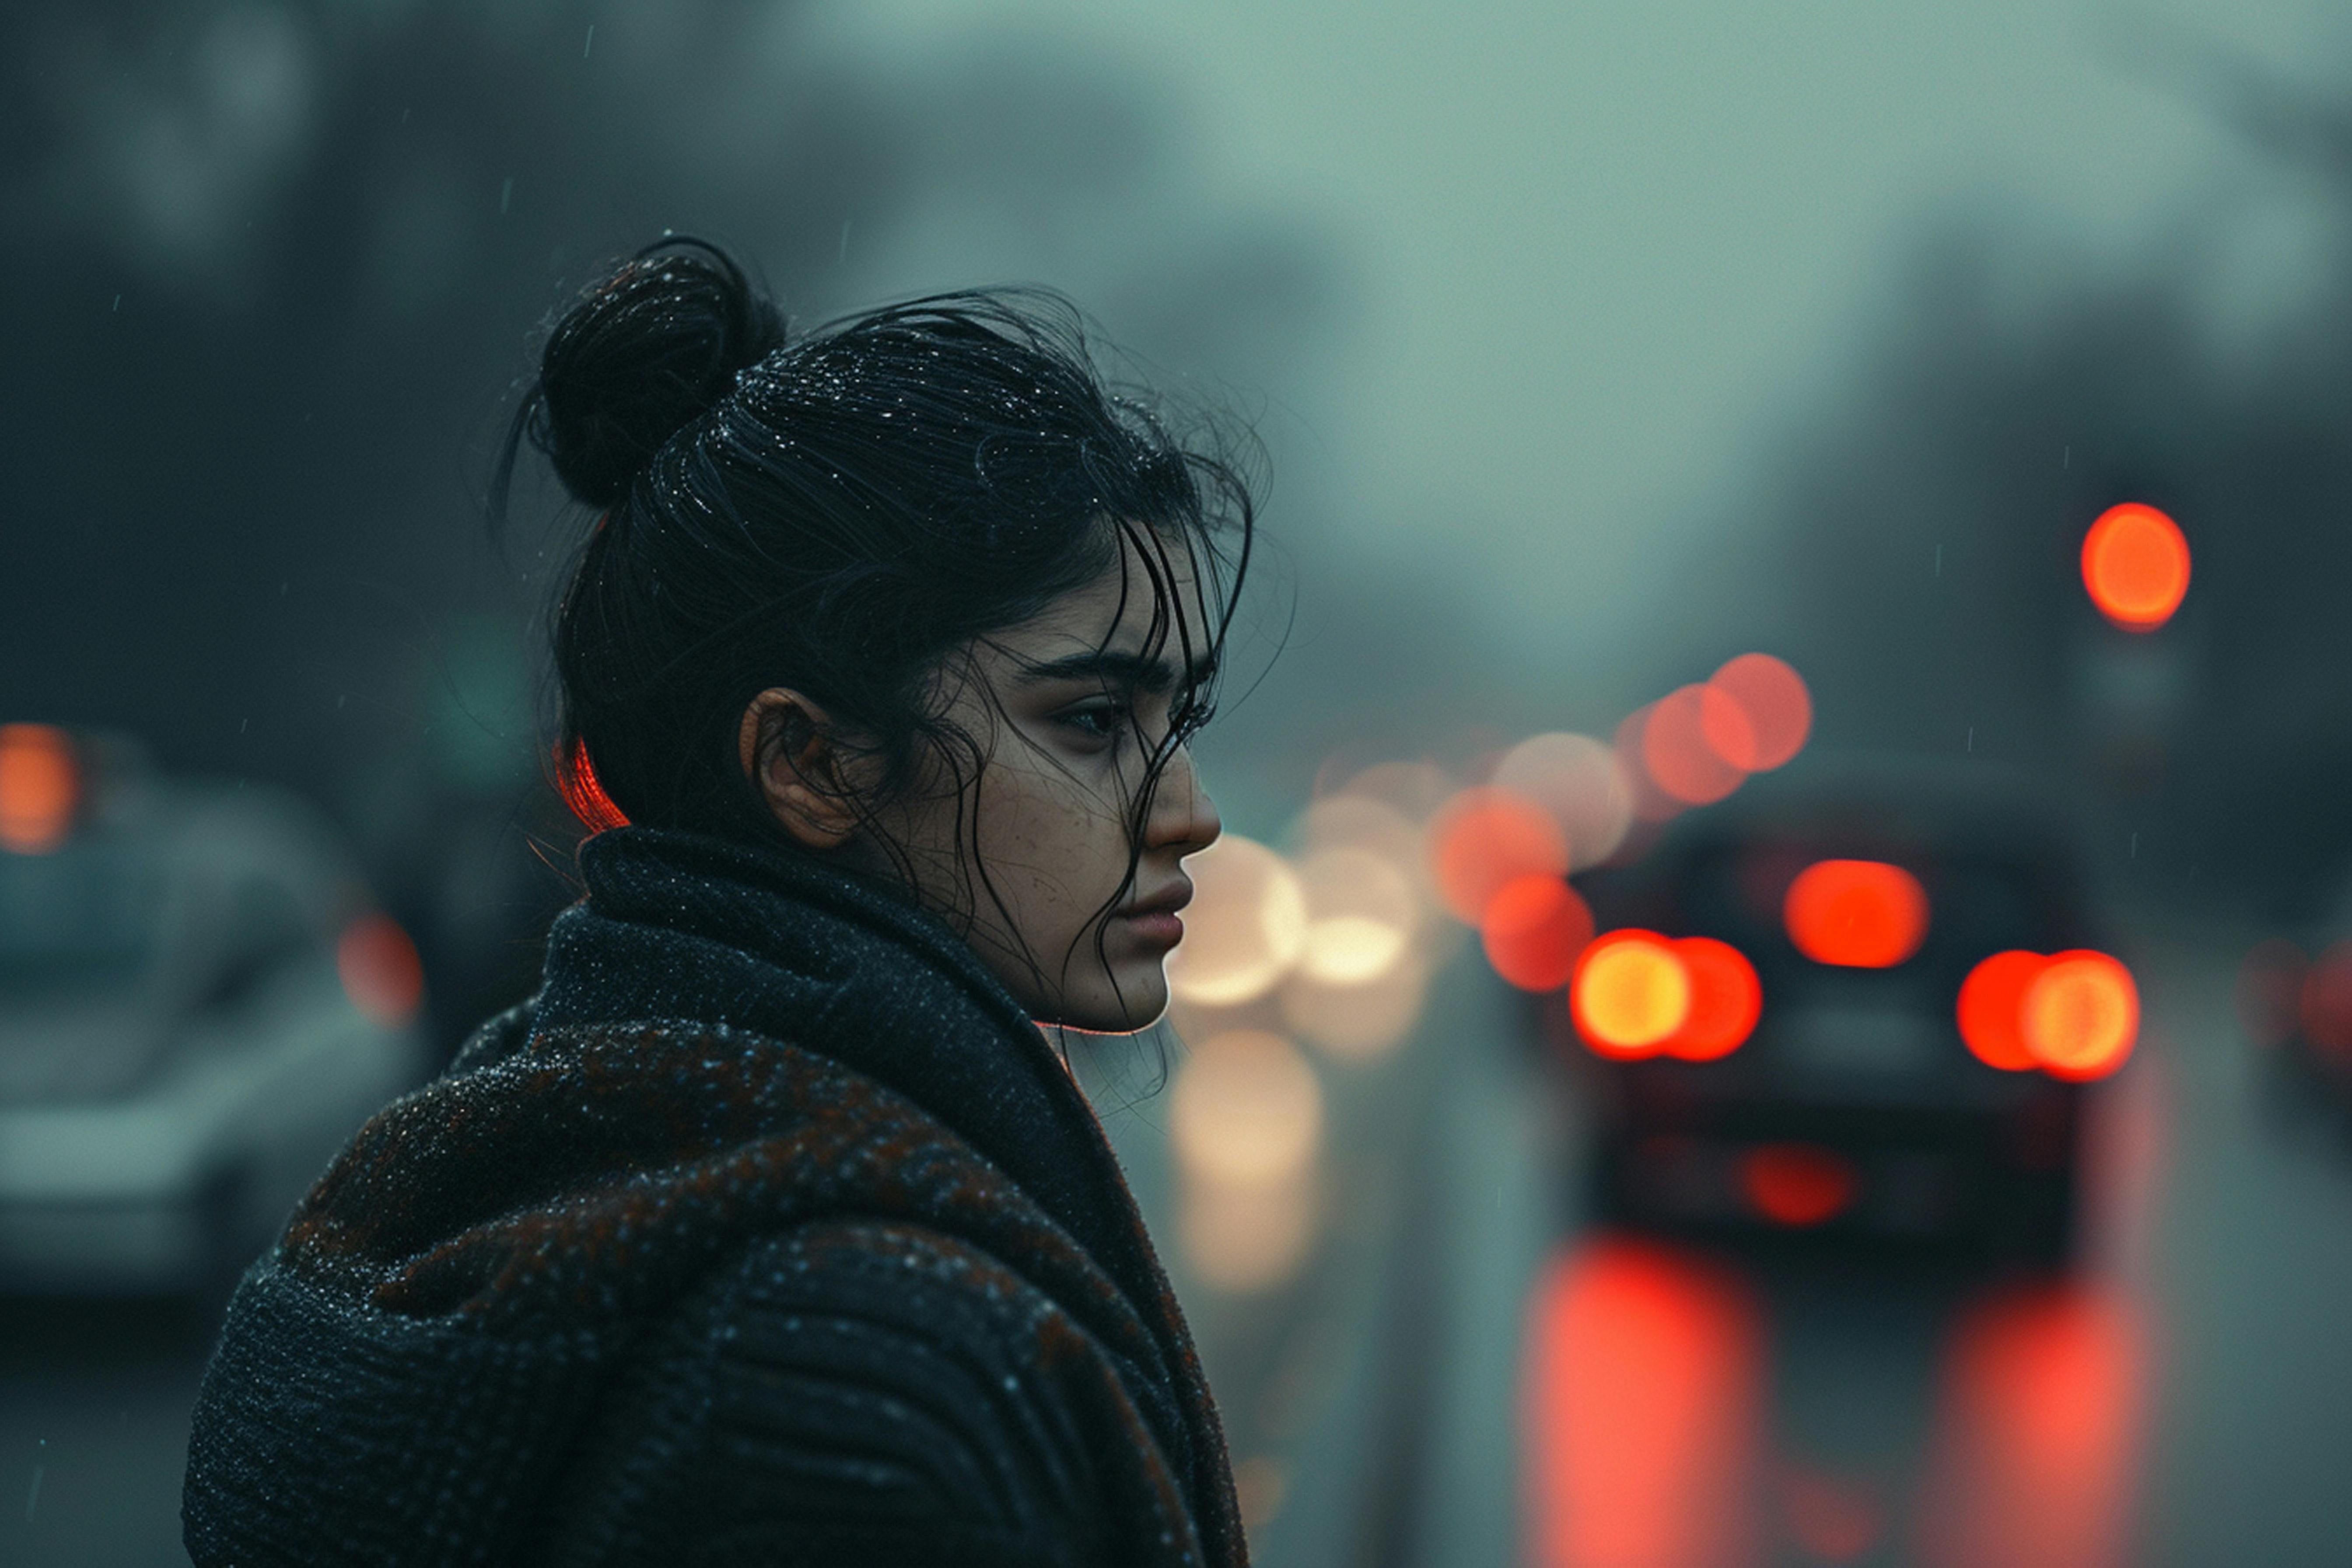  Woman looks sad and depressed while outdoors during the winter